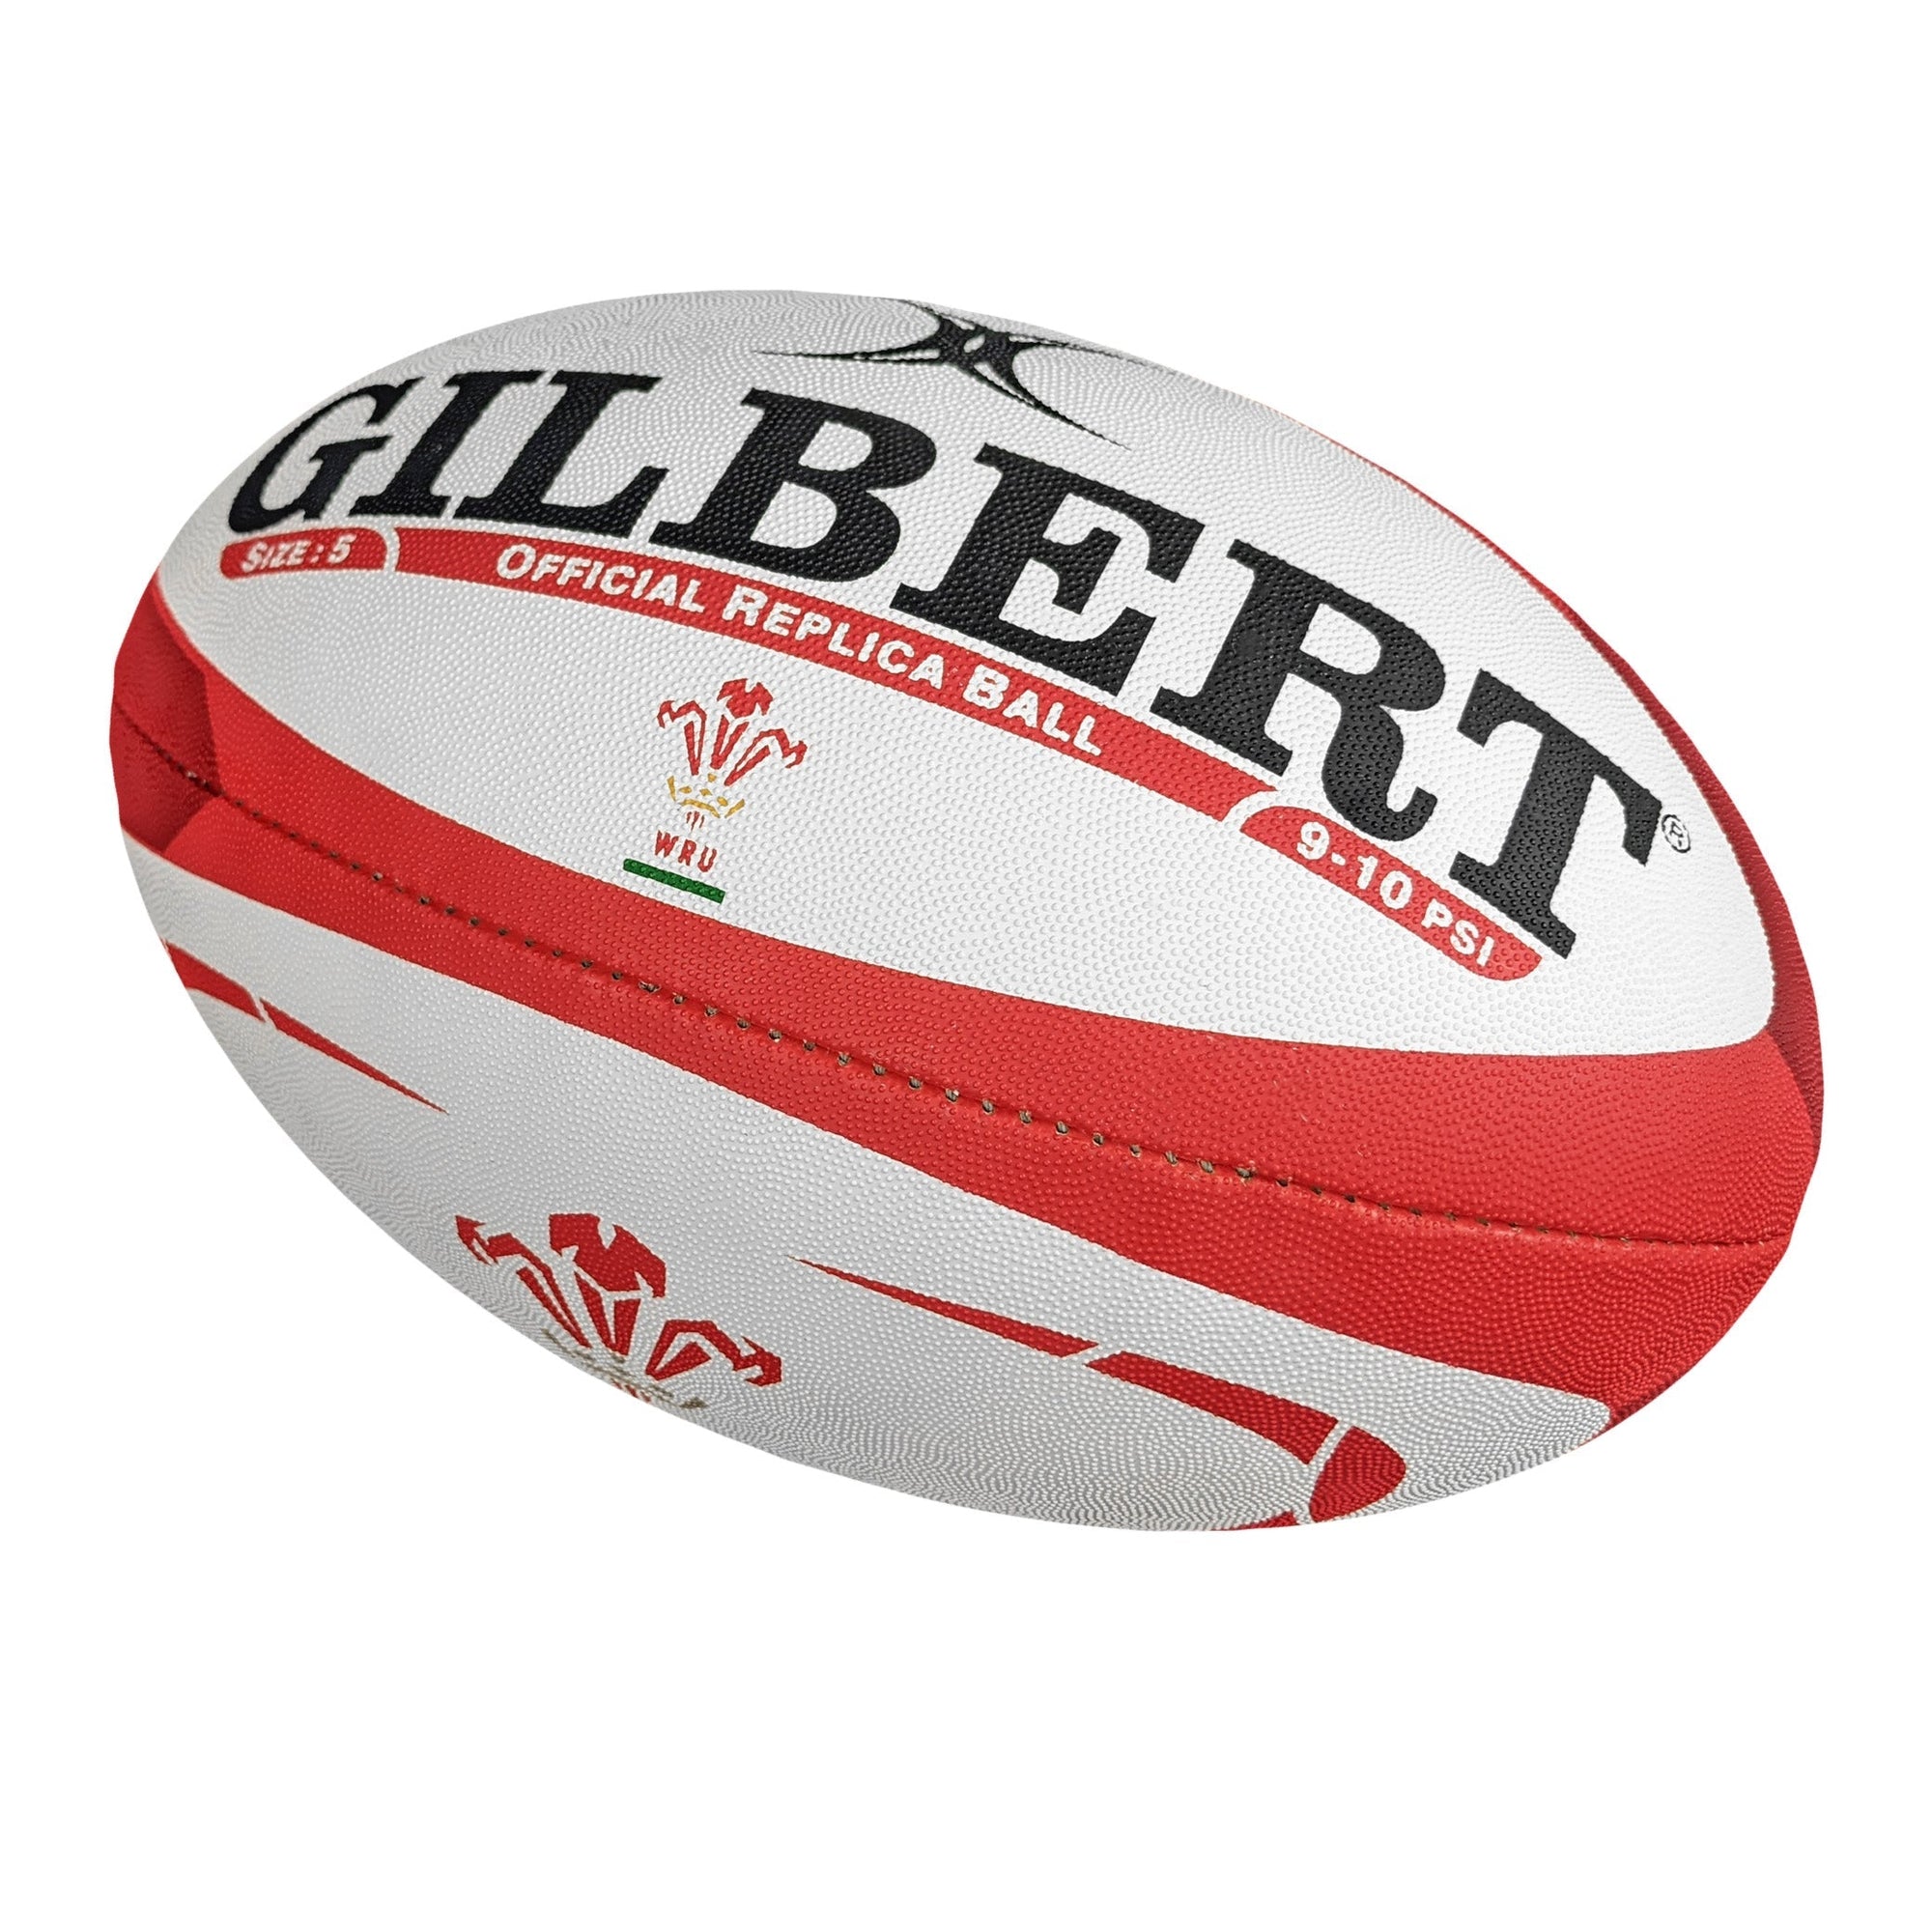 Rugby Imports Gilbert Wales WRU Replica Rugby Ball